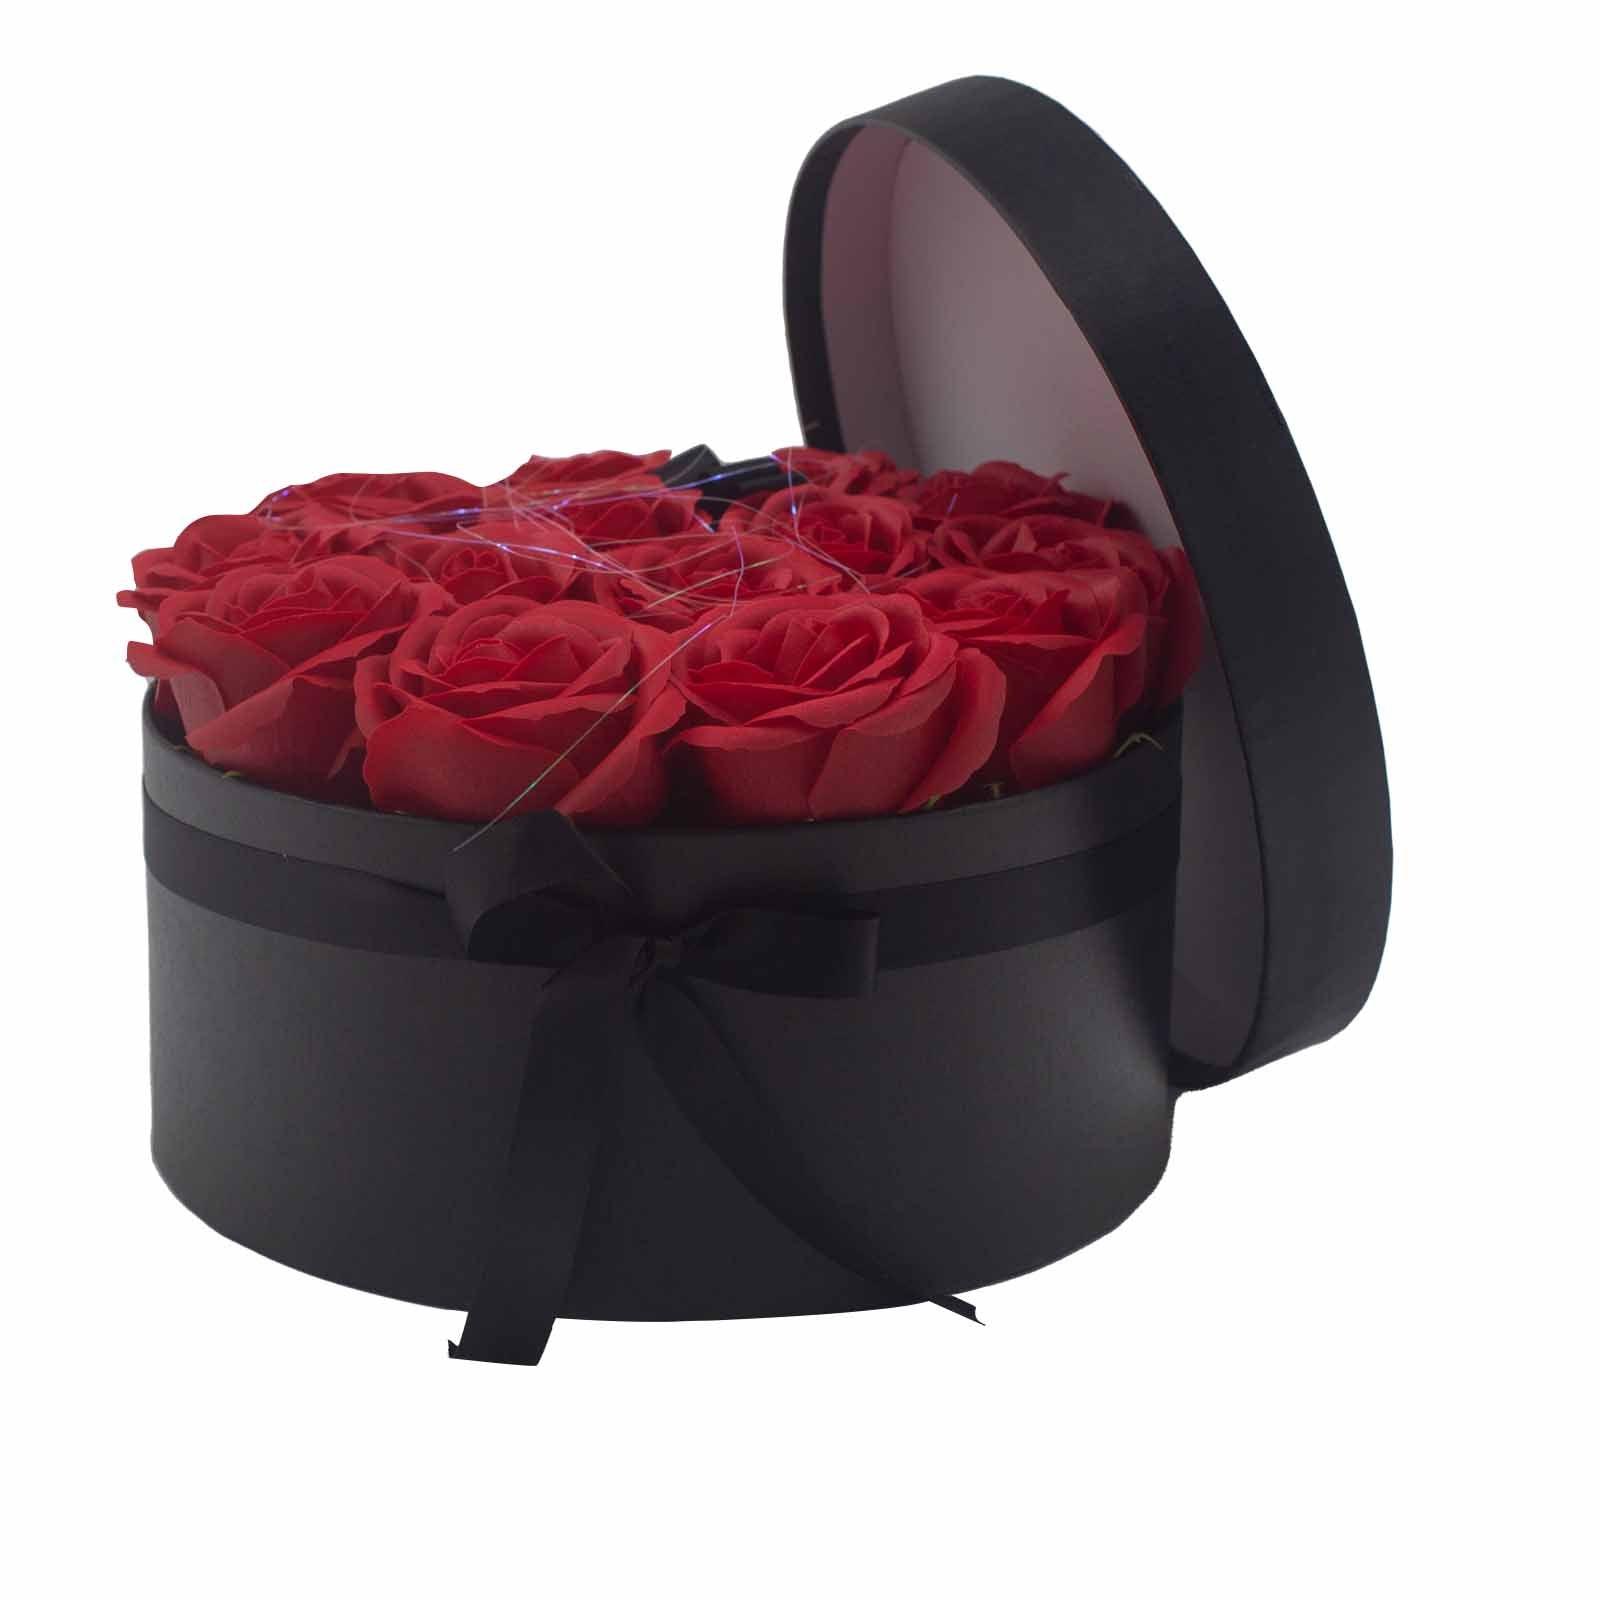 Soap Flower Gift Bouquet - 14 Red Roses - Round - Charming Spaces